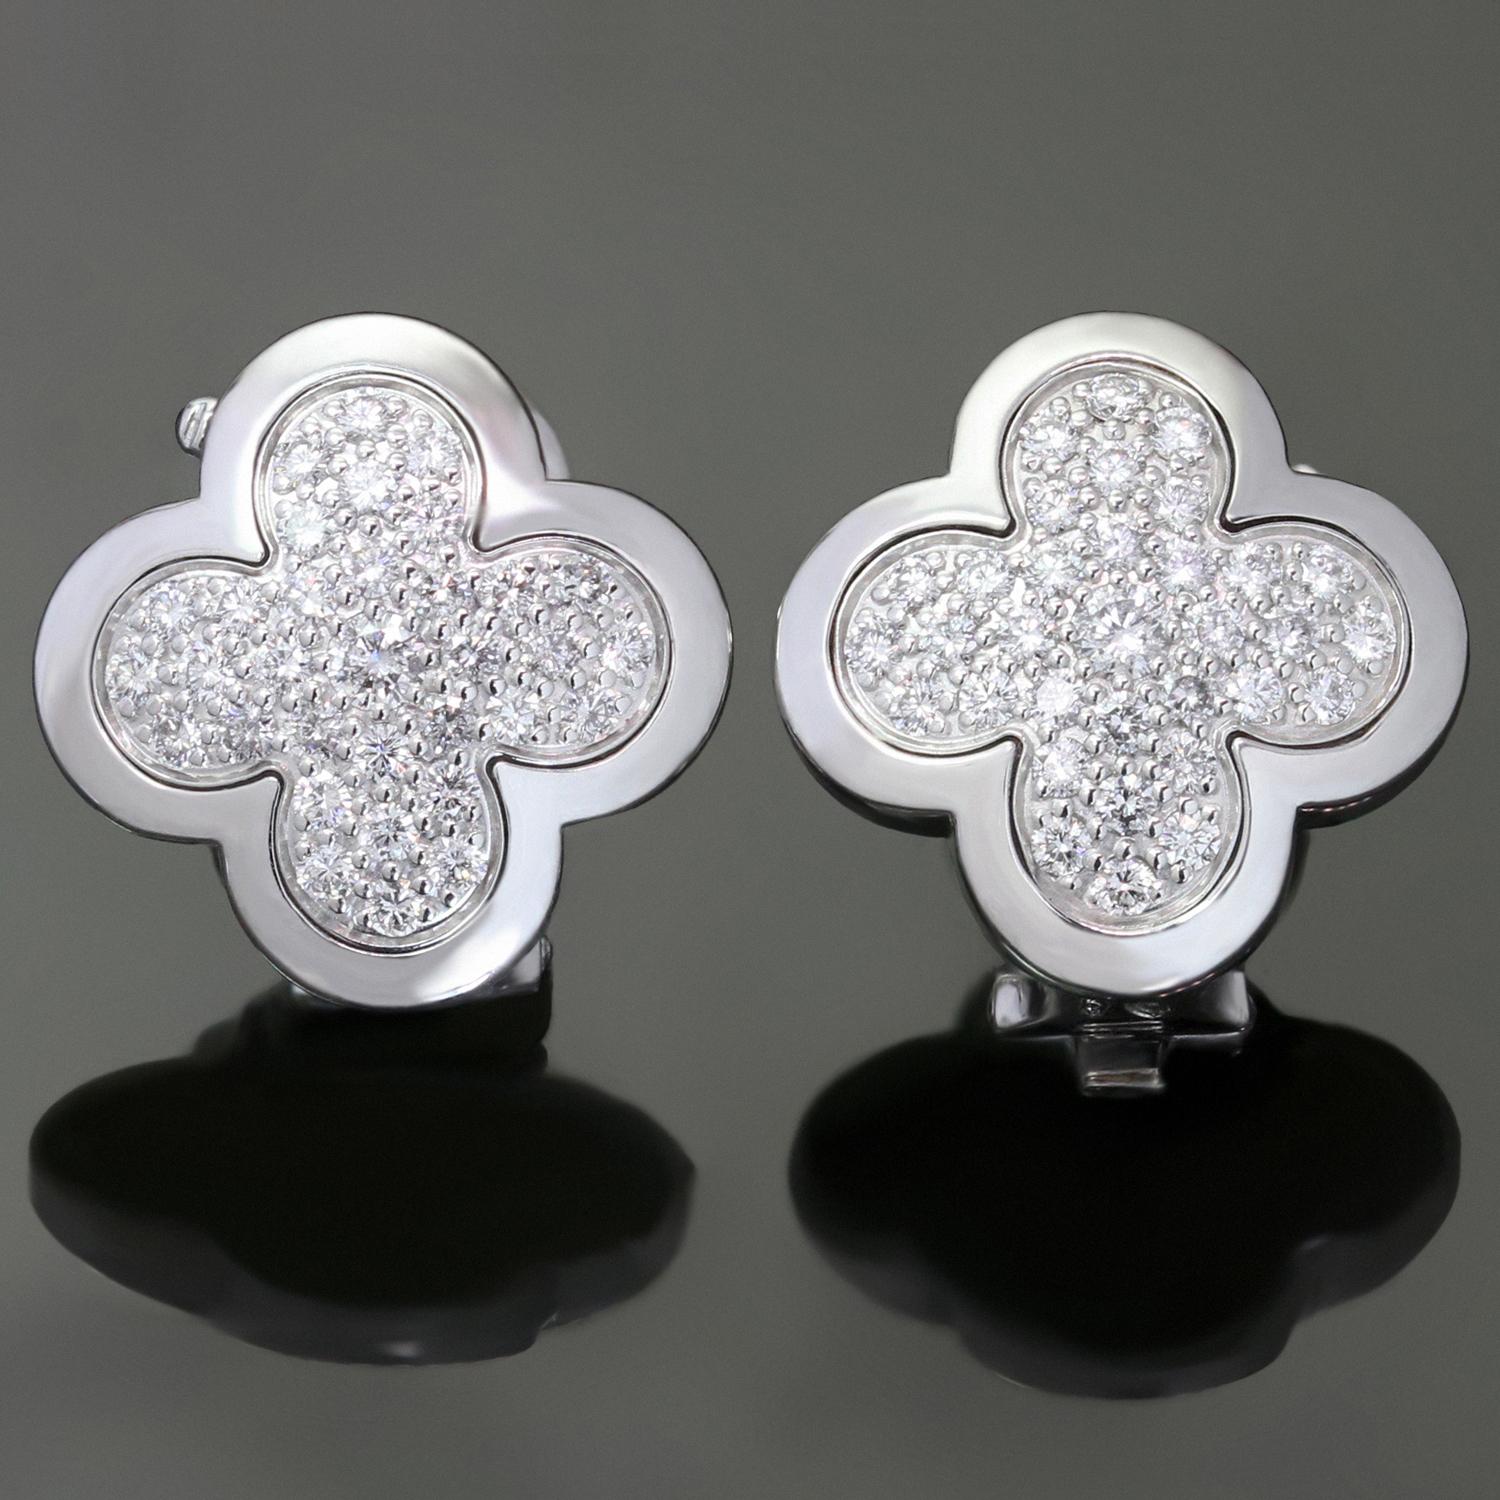 These magnificent Van Cleef & Arpels stud earrings from the Pure Alhambra collection feature the lucky clover motif crafted in 18k white gold and set with brilliant-cut round D-F VVS1-VVS2 diamonds of an estimated 1.65 carats. Made in France circa